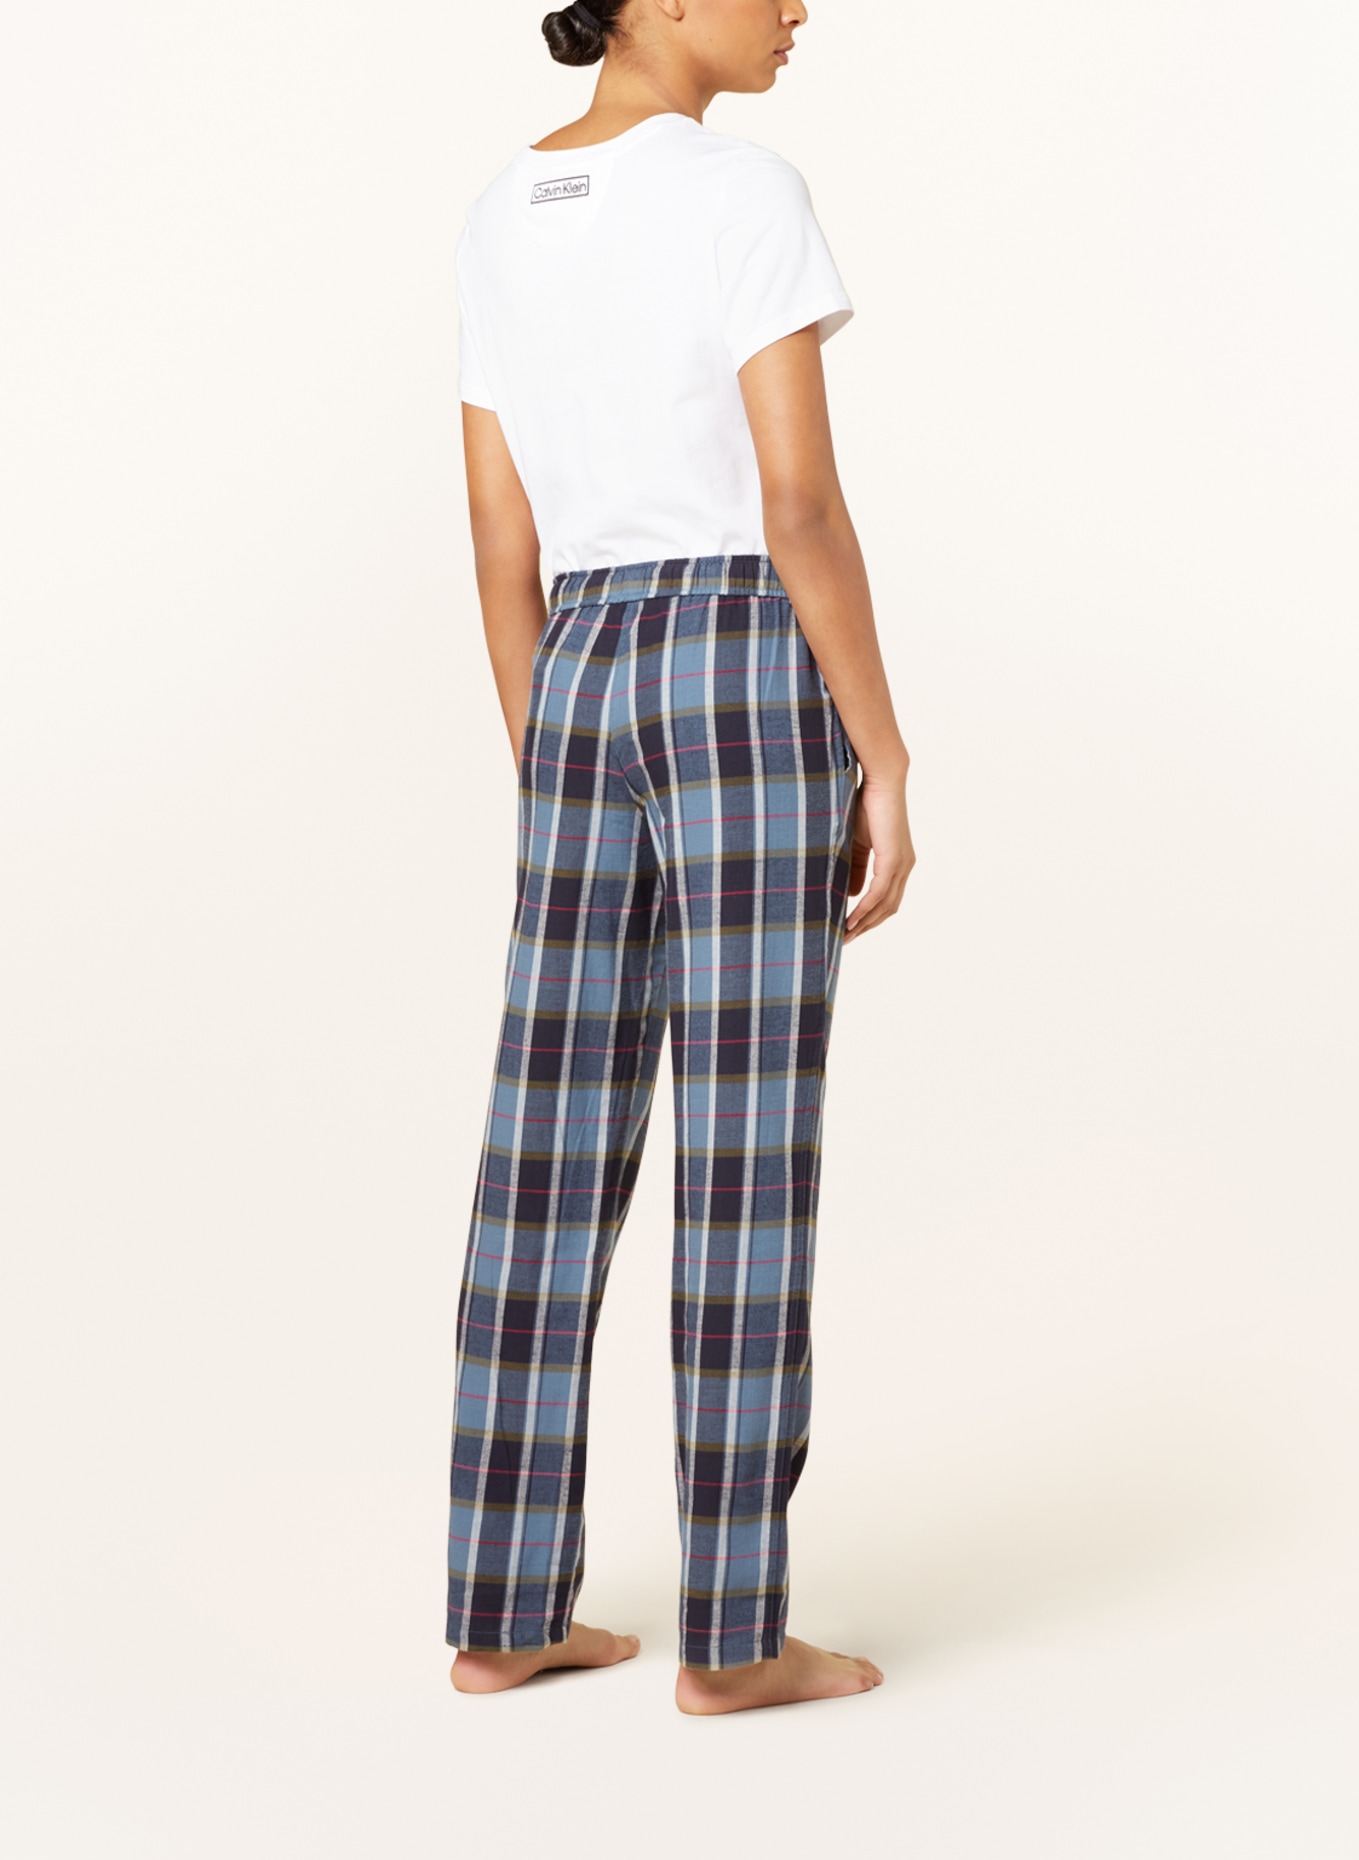 SCHIESSER Pajama pants MIX+RELAX in flannel, Color: DARK BLUE/ LIGHT BLUE/ WHITE (Image 3)